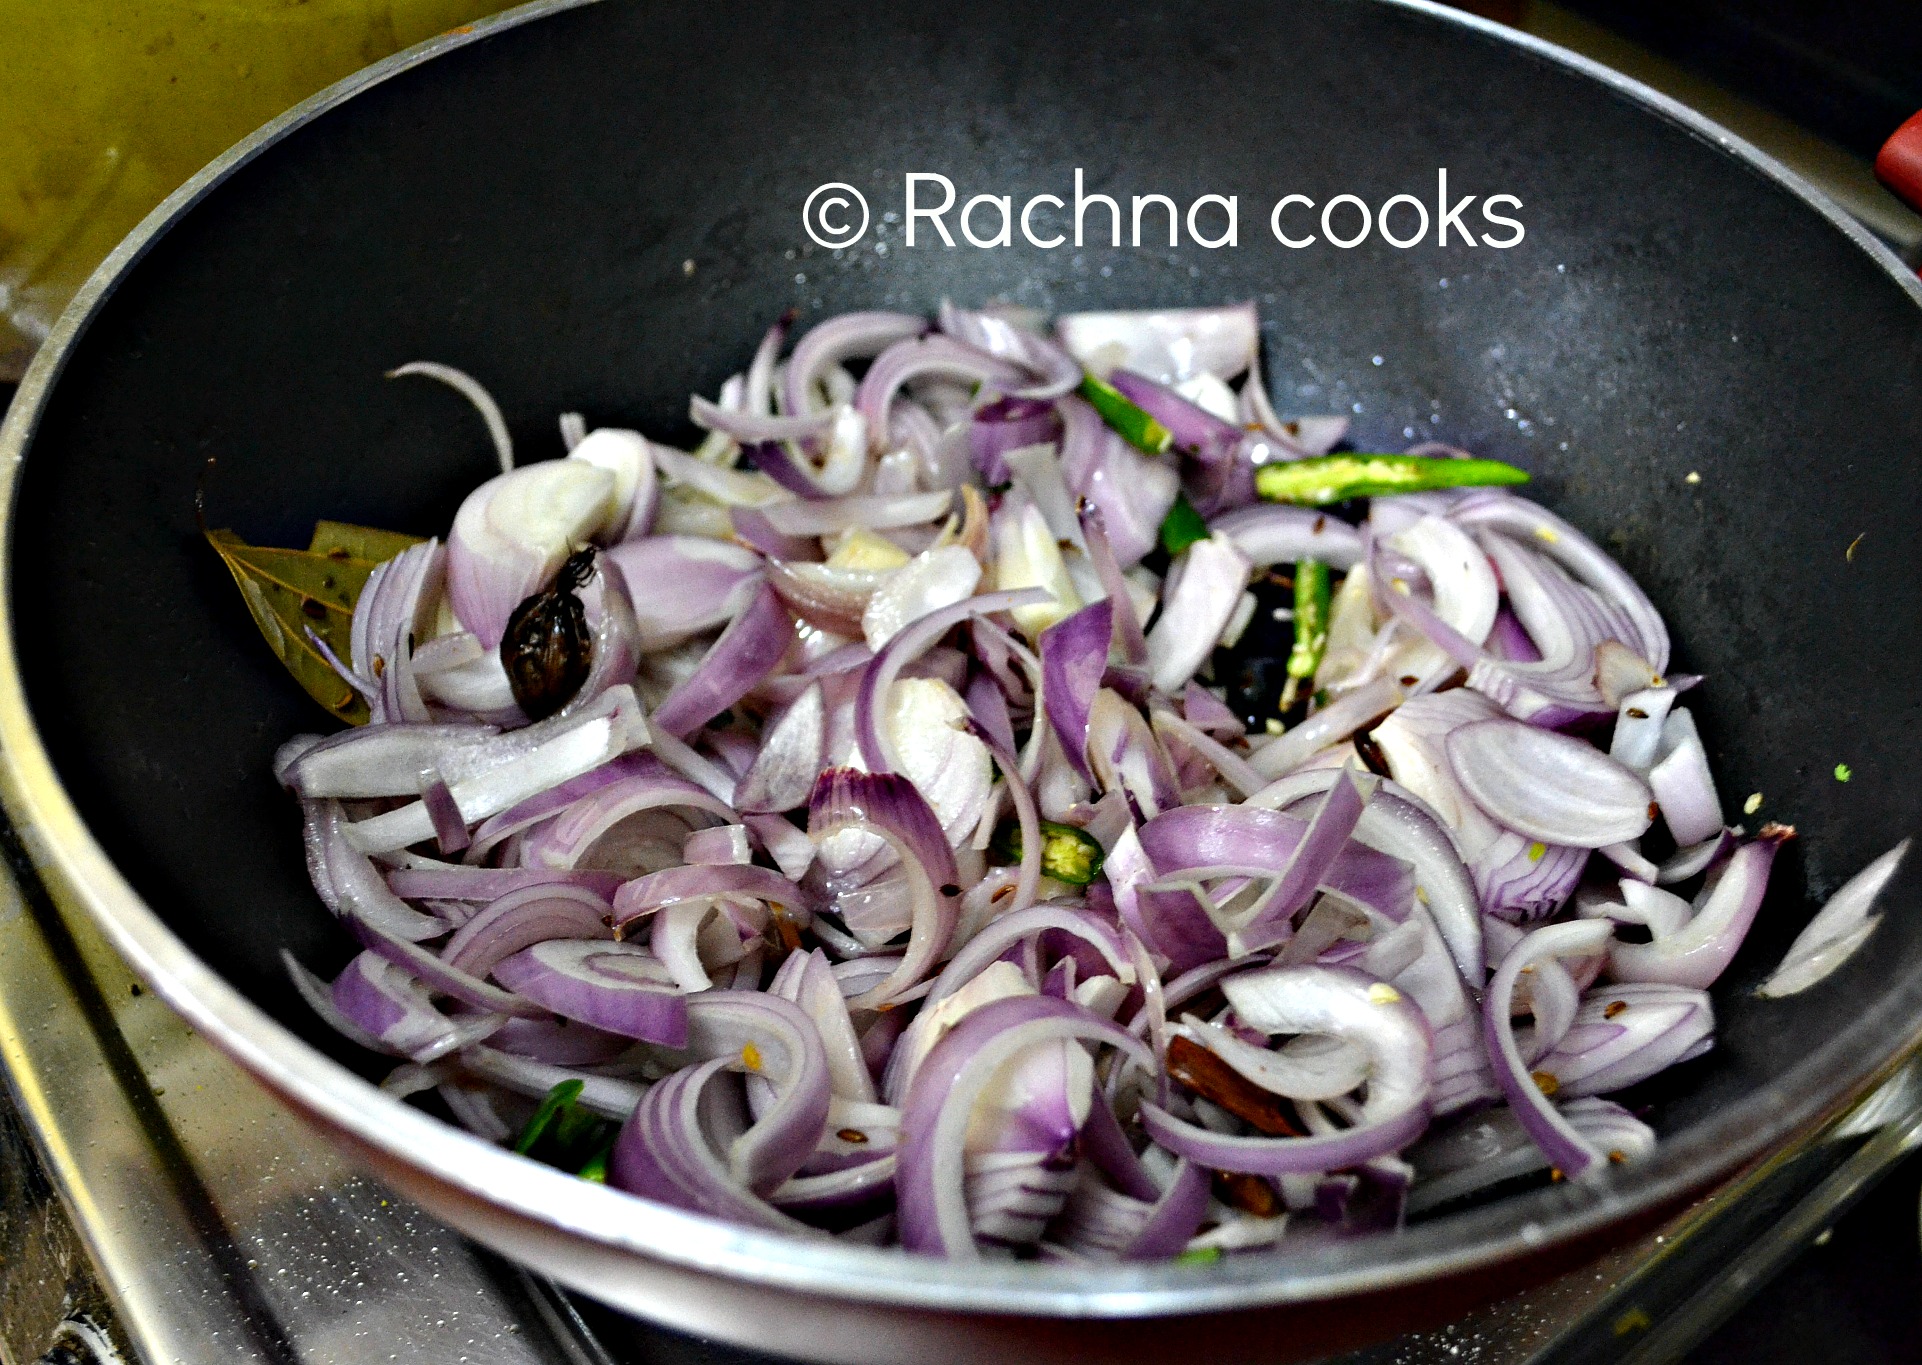 Sauteing sliced onions and green chillies in a kadhai or work